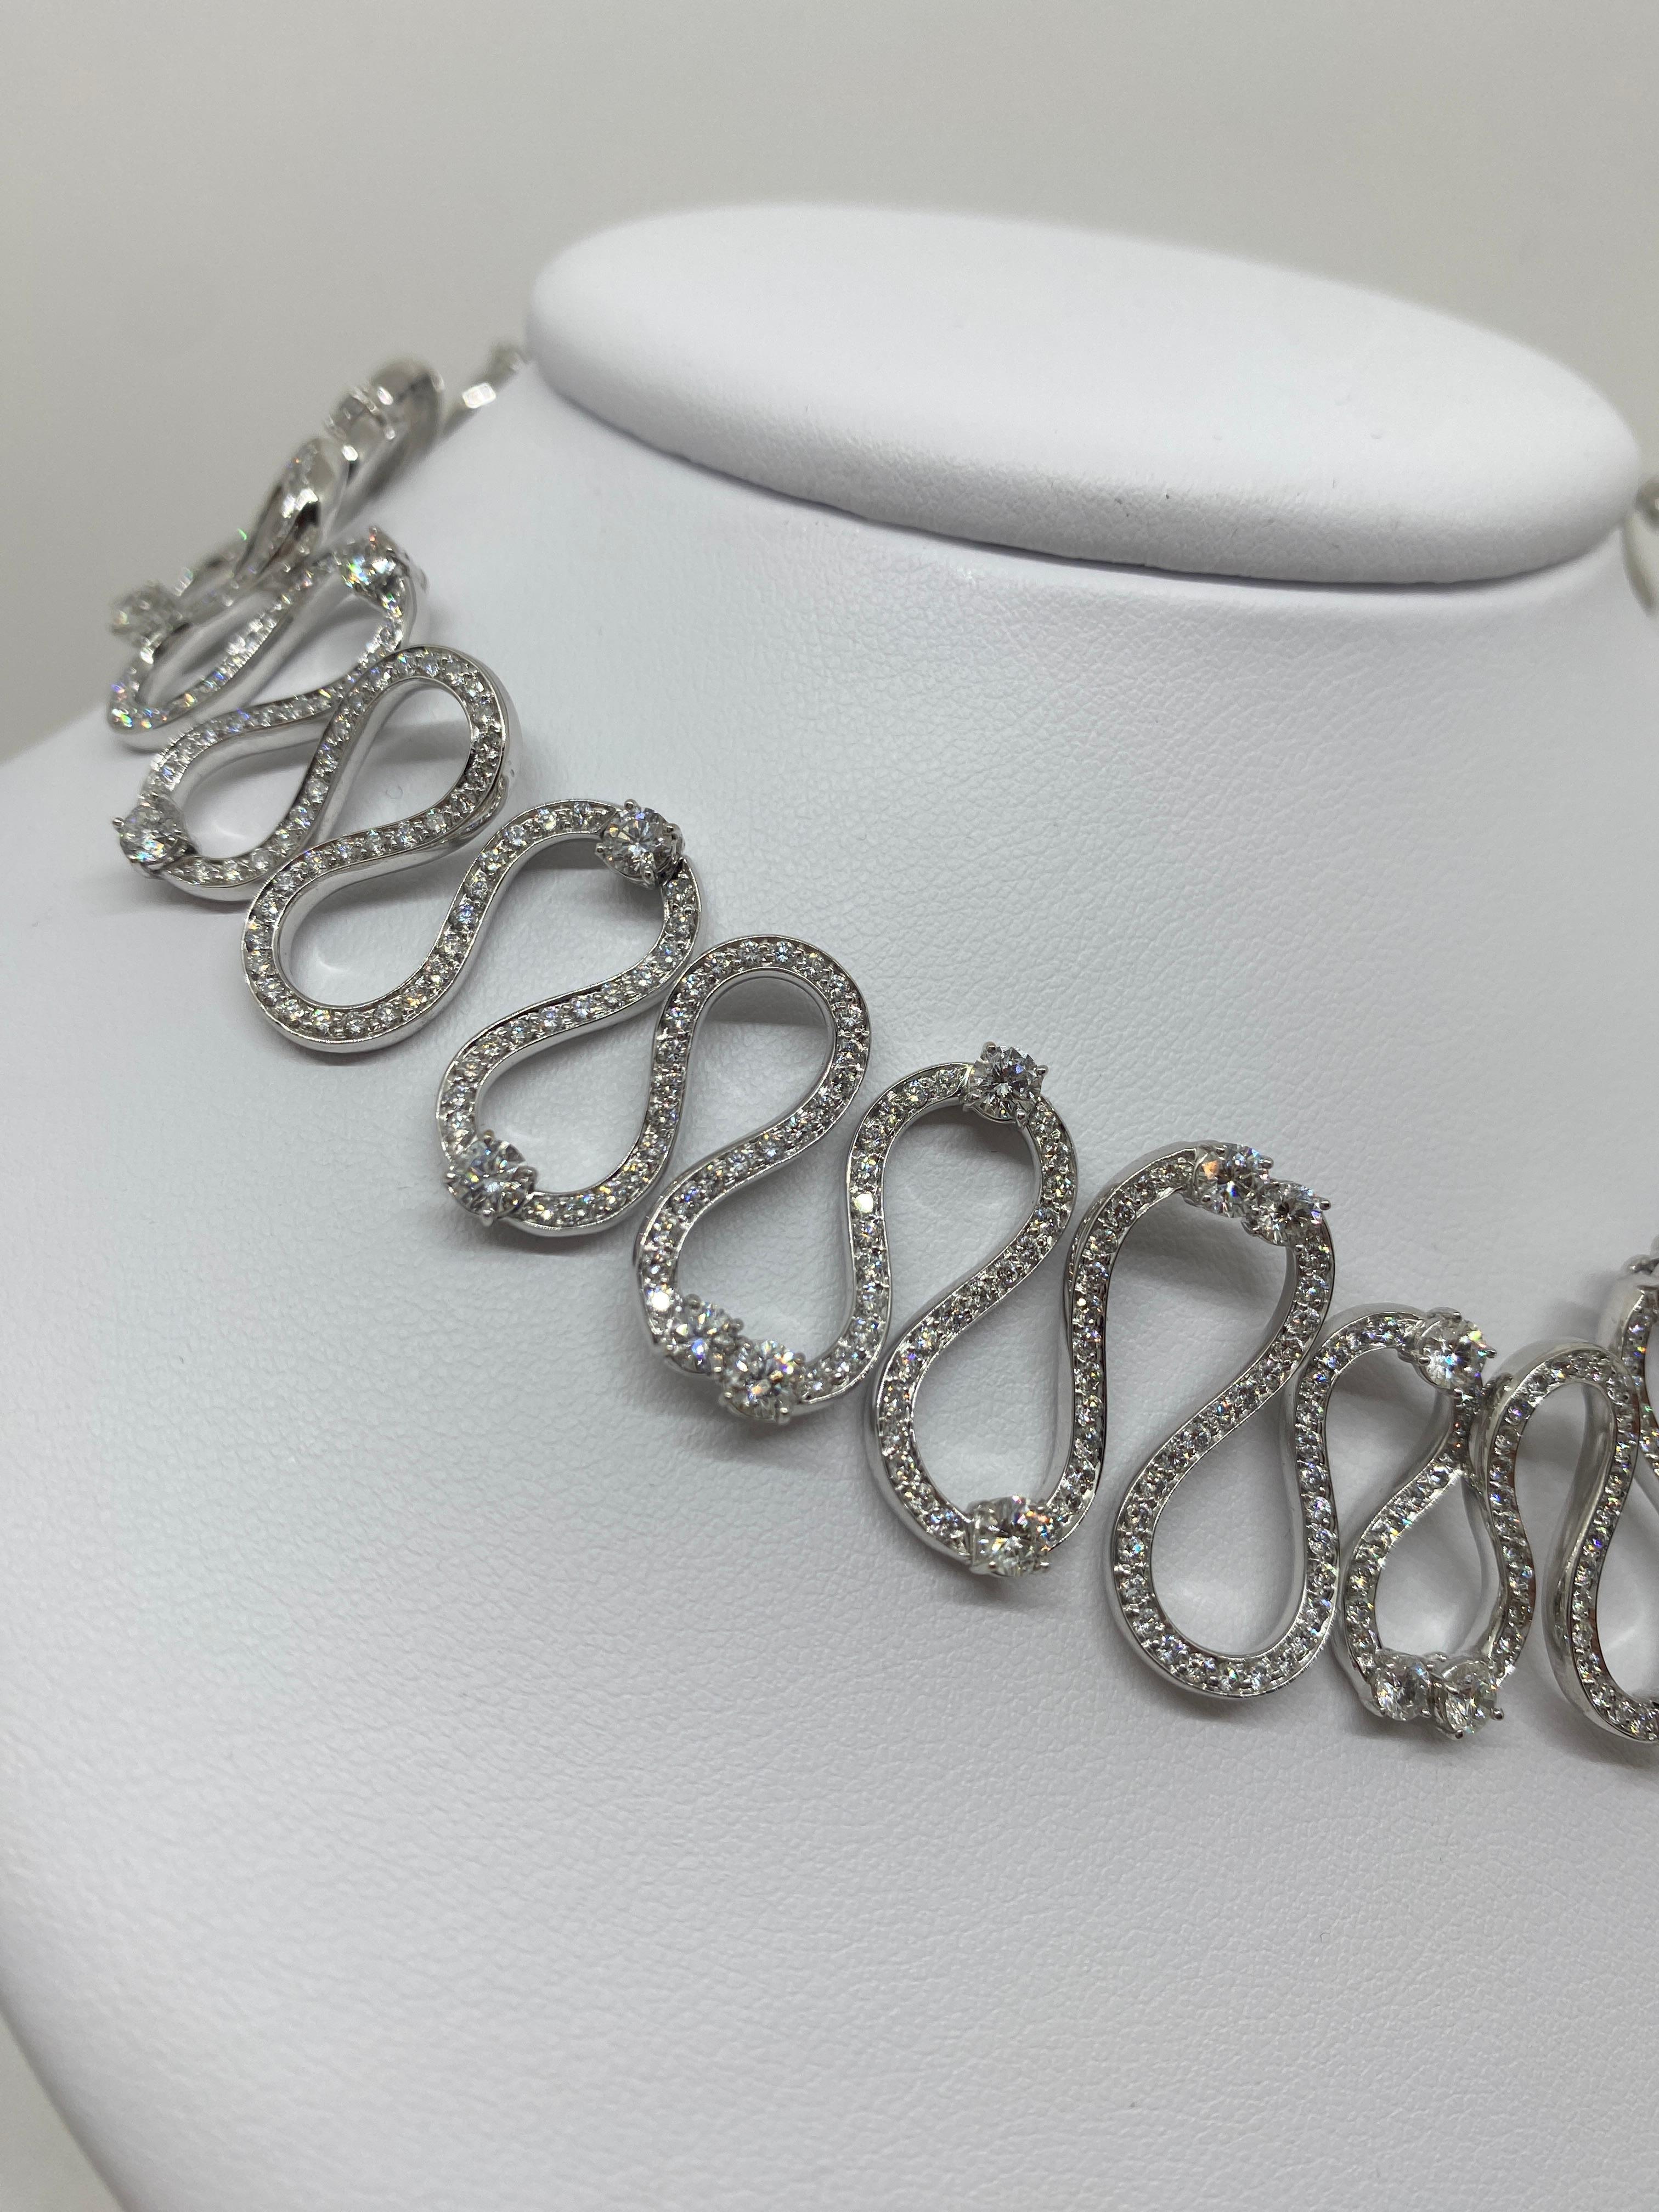 One of a Kind 18 Kt White Gold Cantamessa Queen Necklace 15.64 Ct White Diamonds For Sale 2